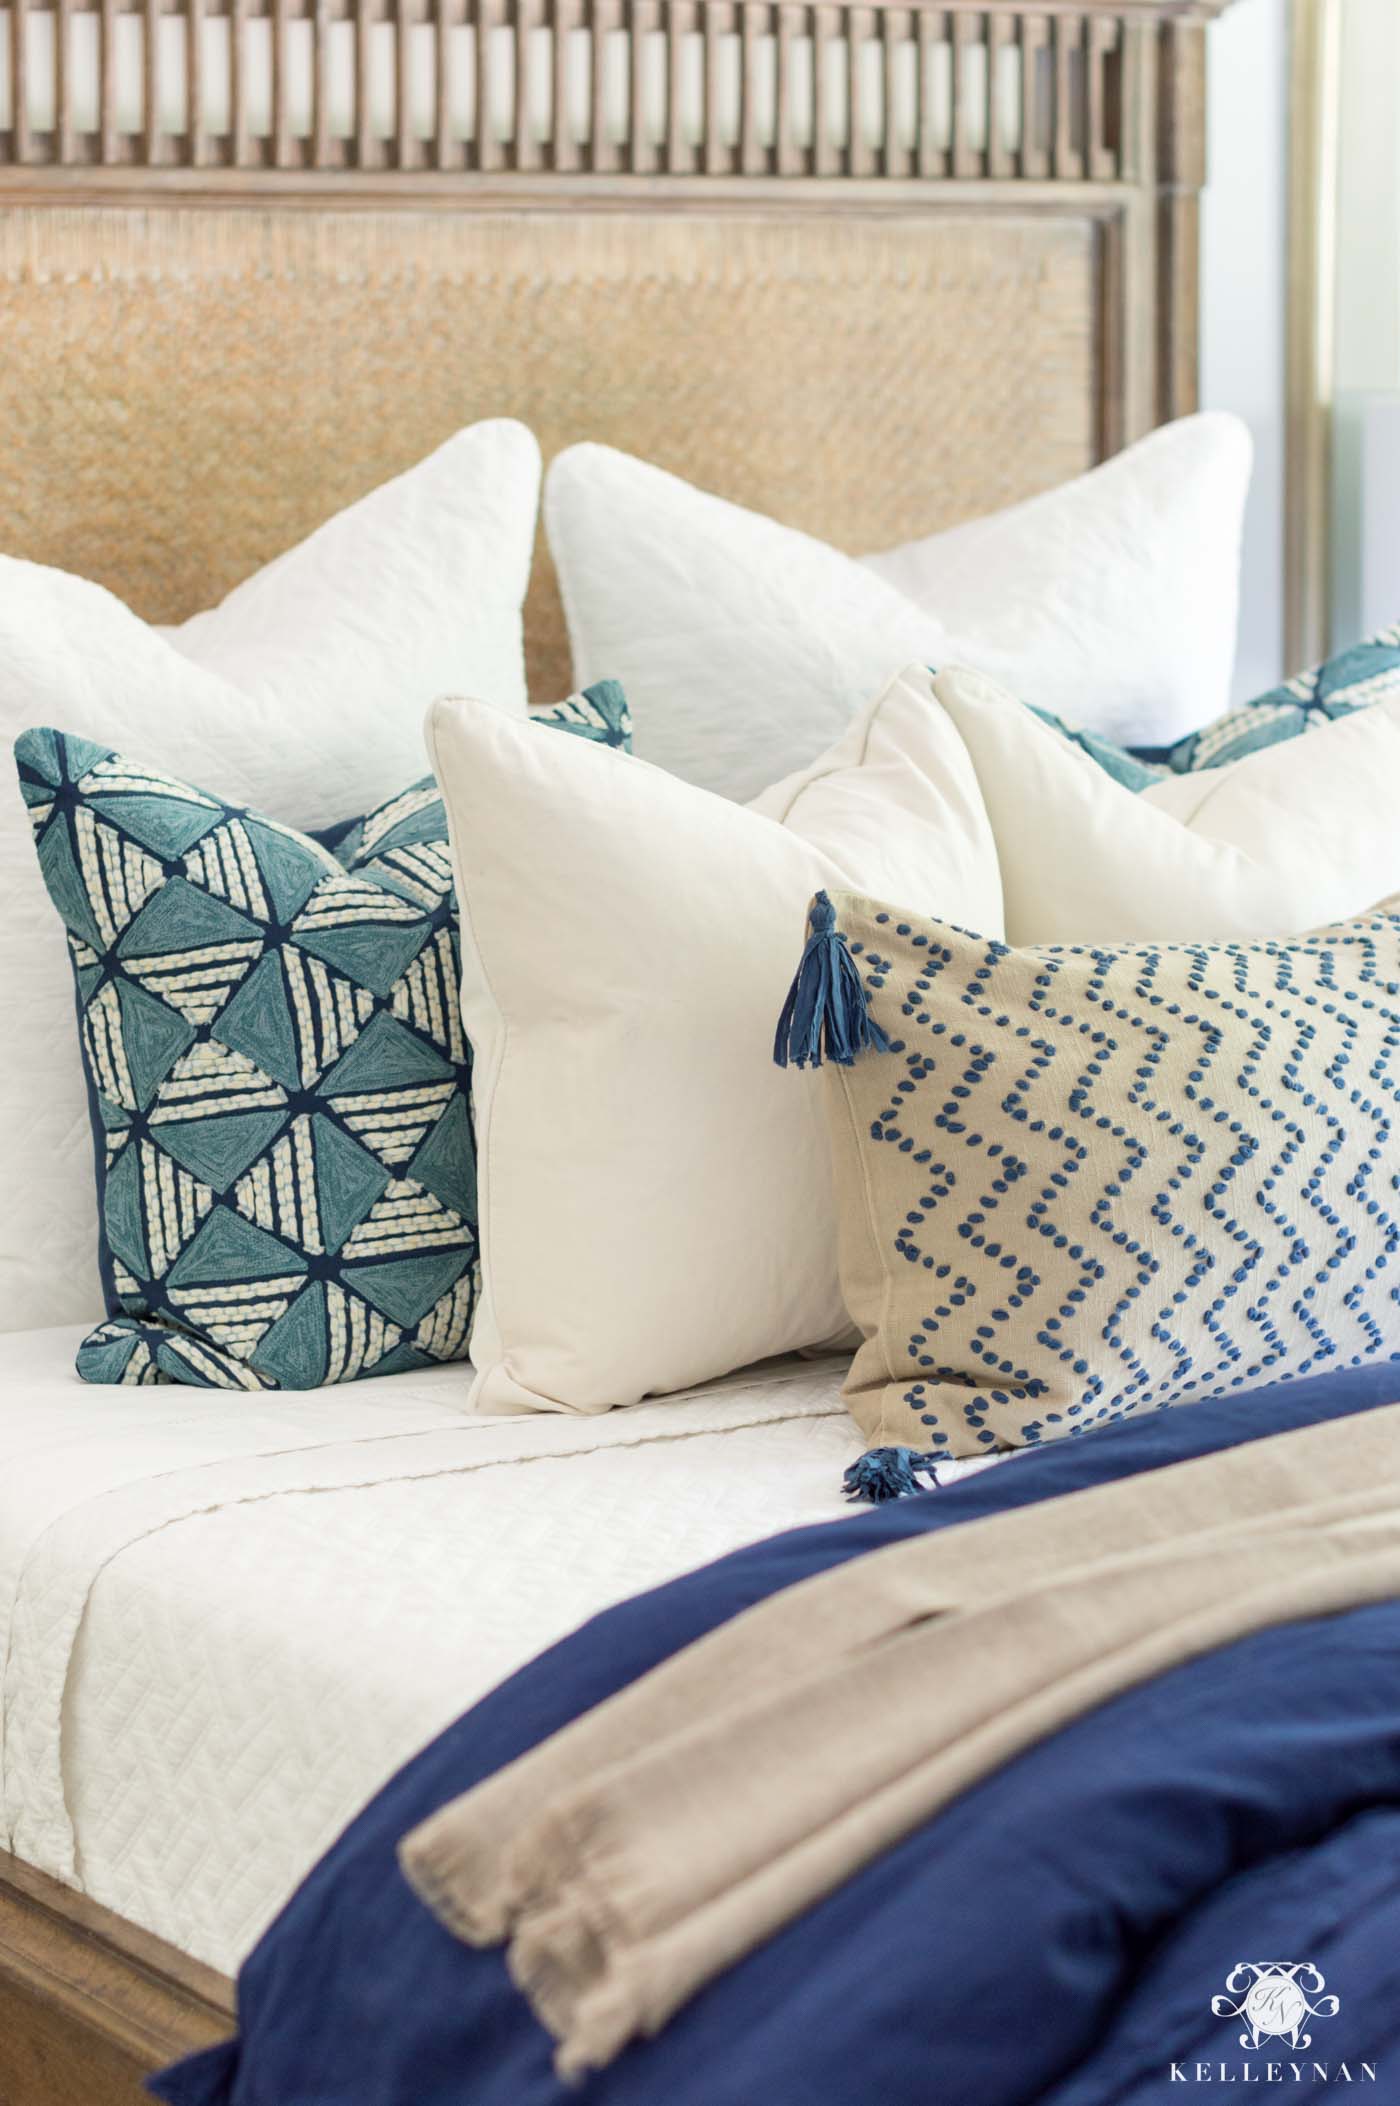 How to Mix and Match Throw Pillows on a Bed